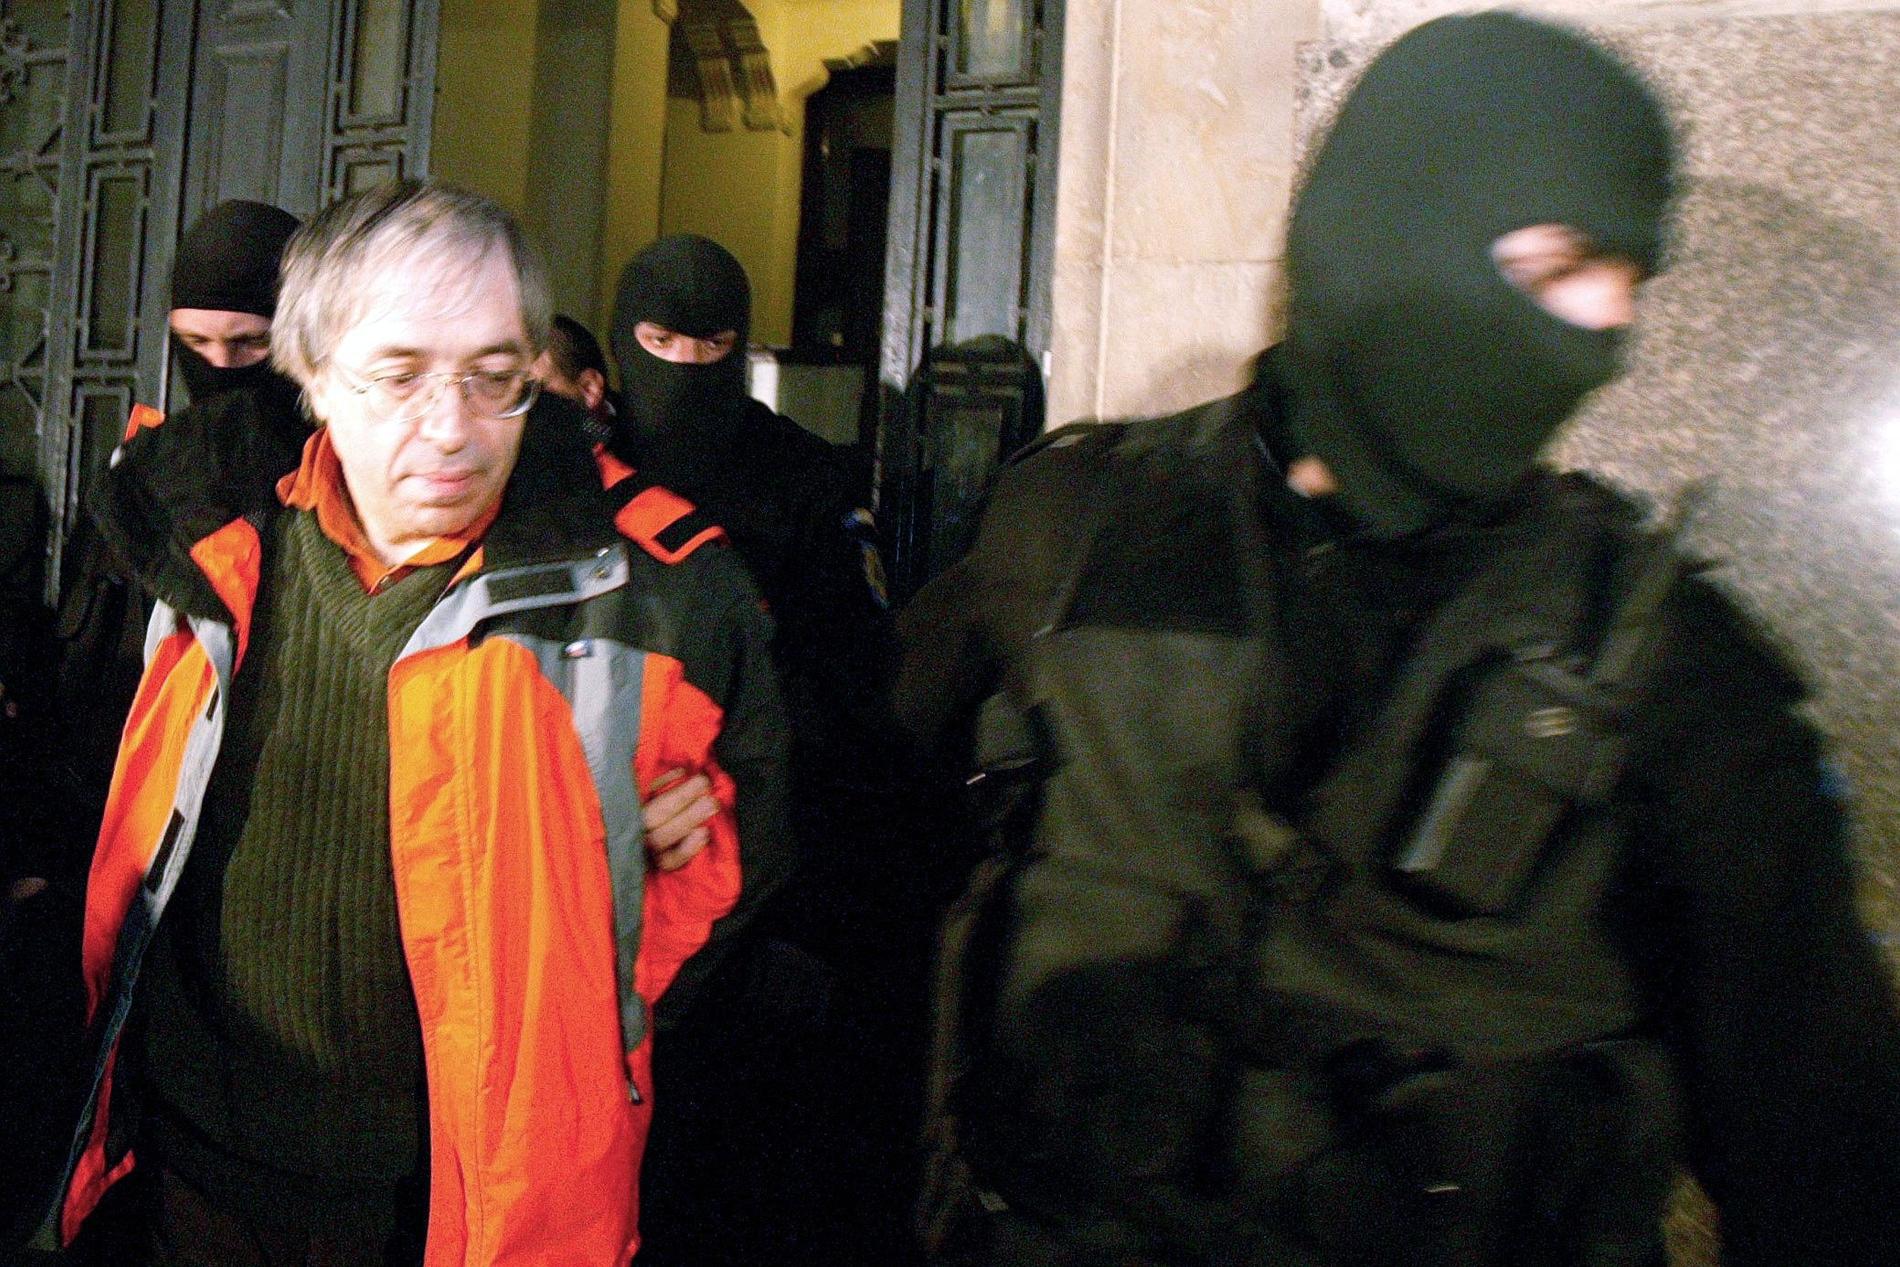 Controversial Yoga Sect Leader Bivolaru Arrested in France: Human Trafficking, Abuse, and More